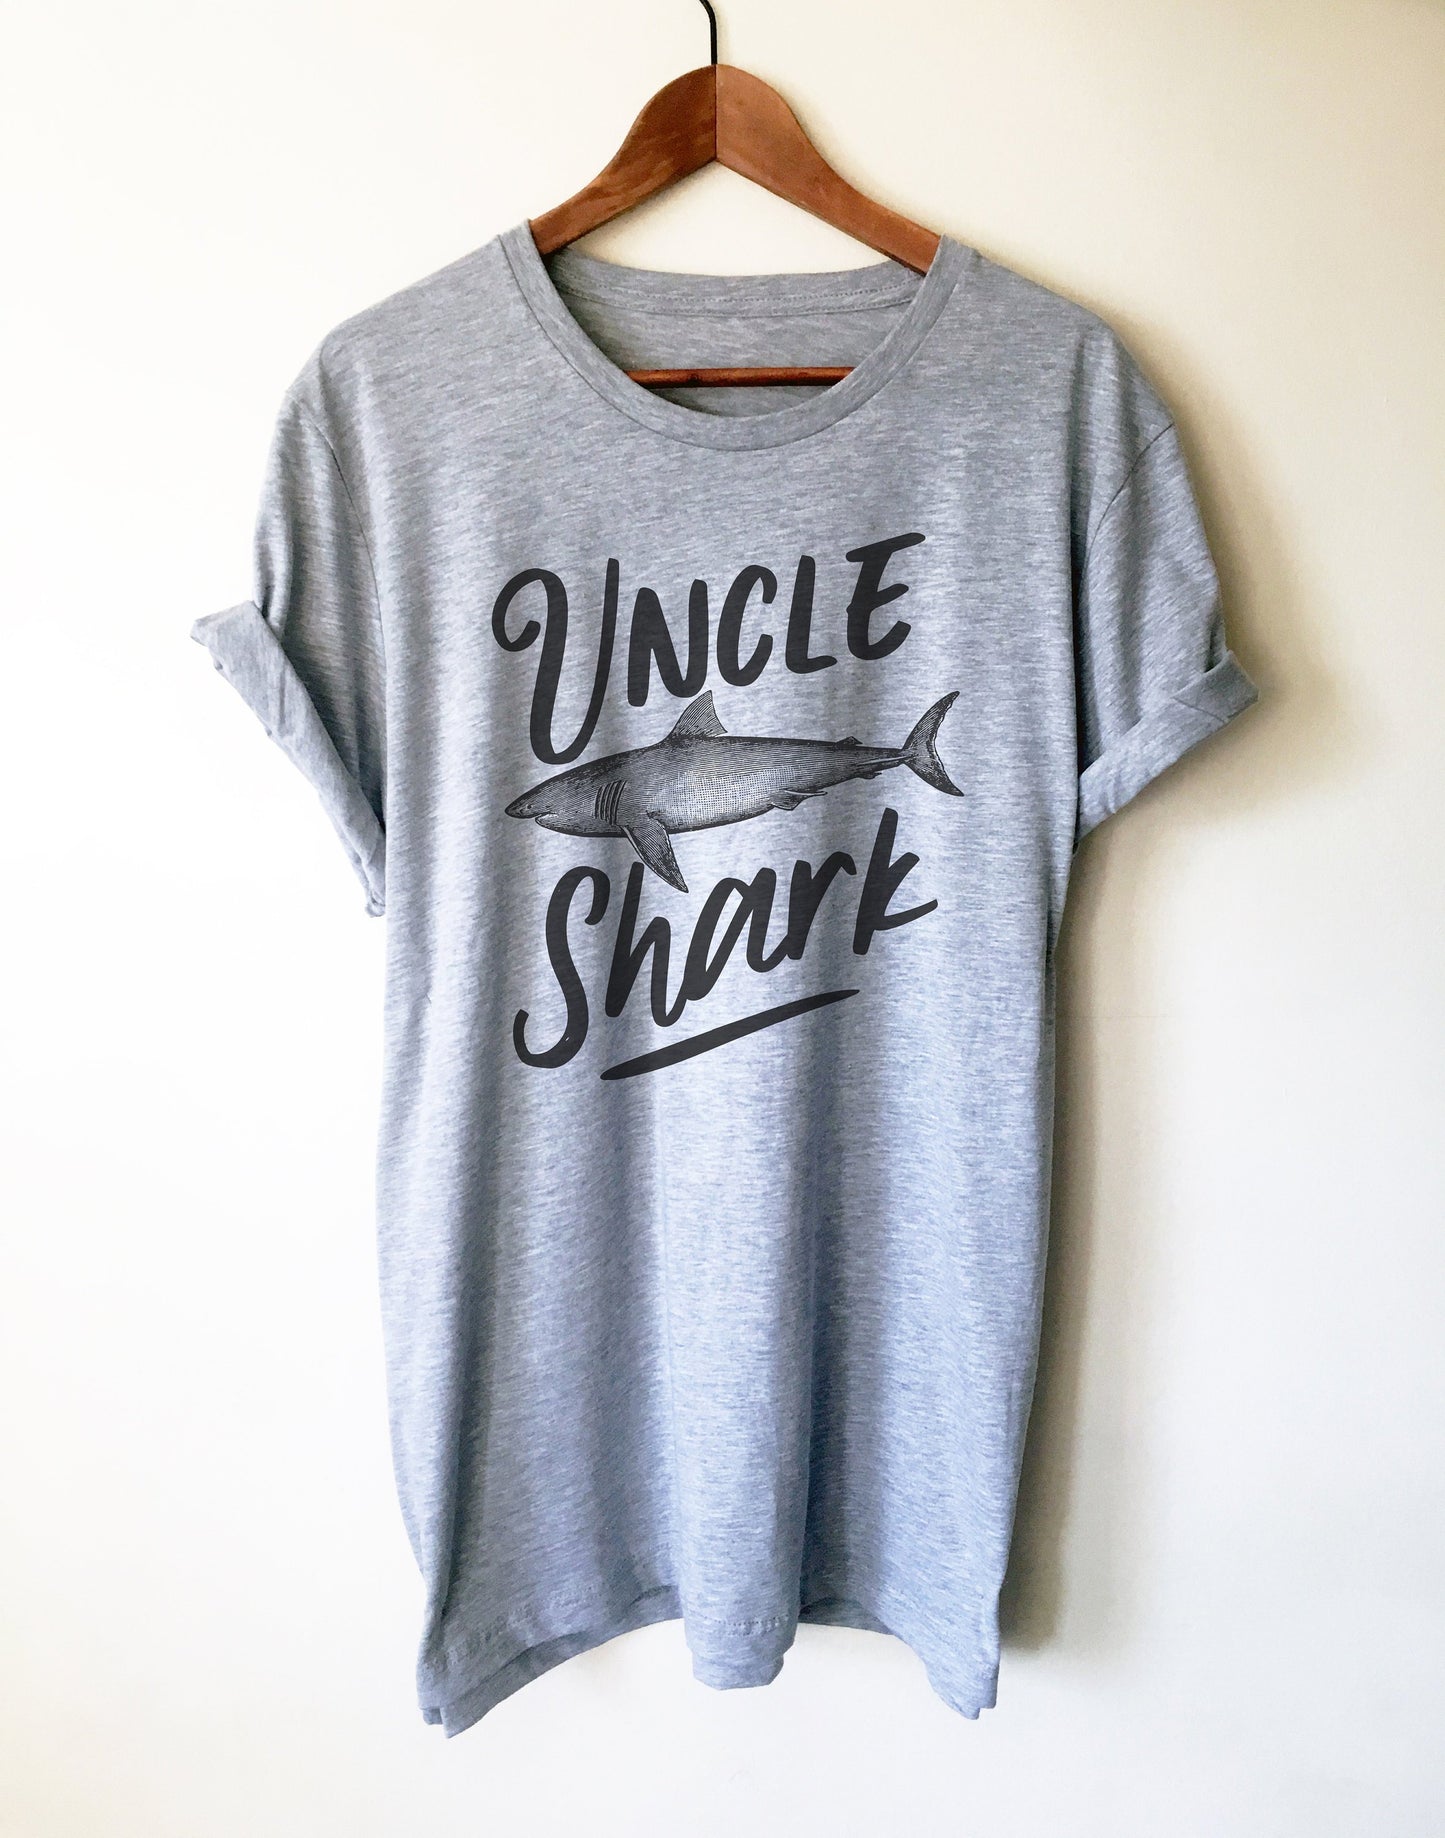 Uncle Shark Shirt - Shark Family Shirt - Uncle Shirt - Pregnancy Announcement shirt - Pregnancy reveal to uncle - Uncle gift New Uncle shirt